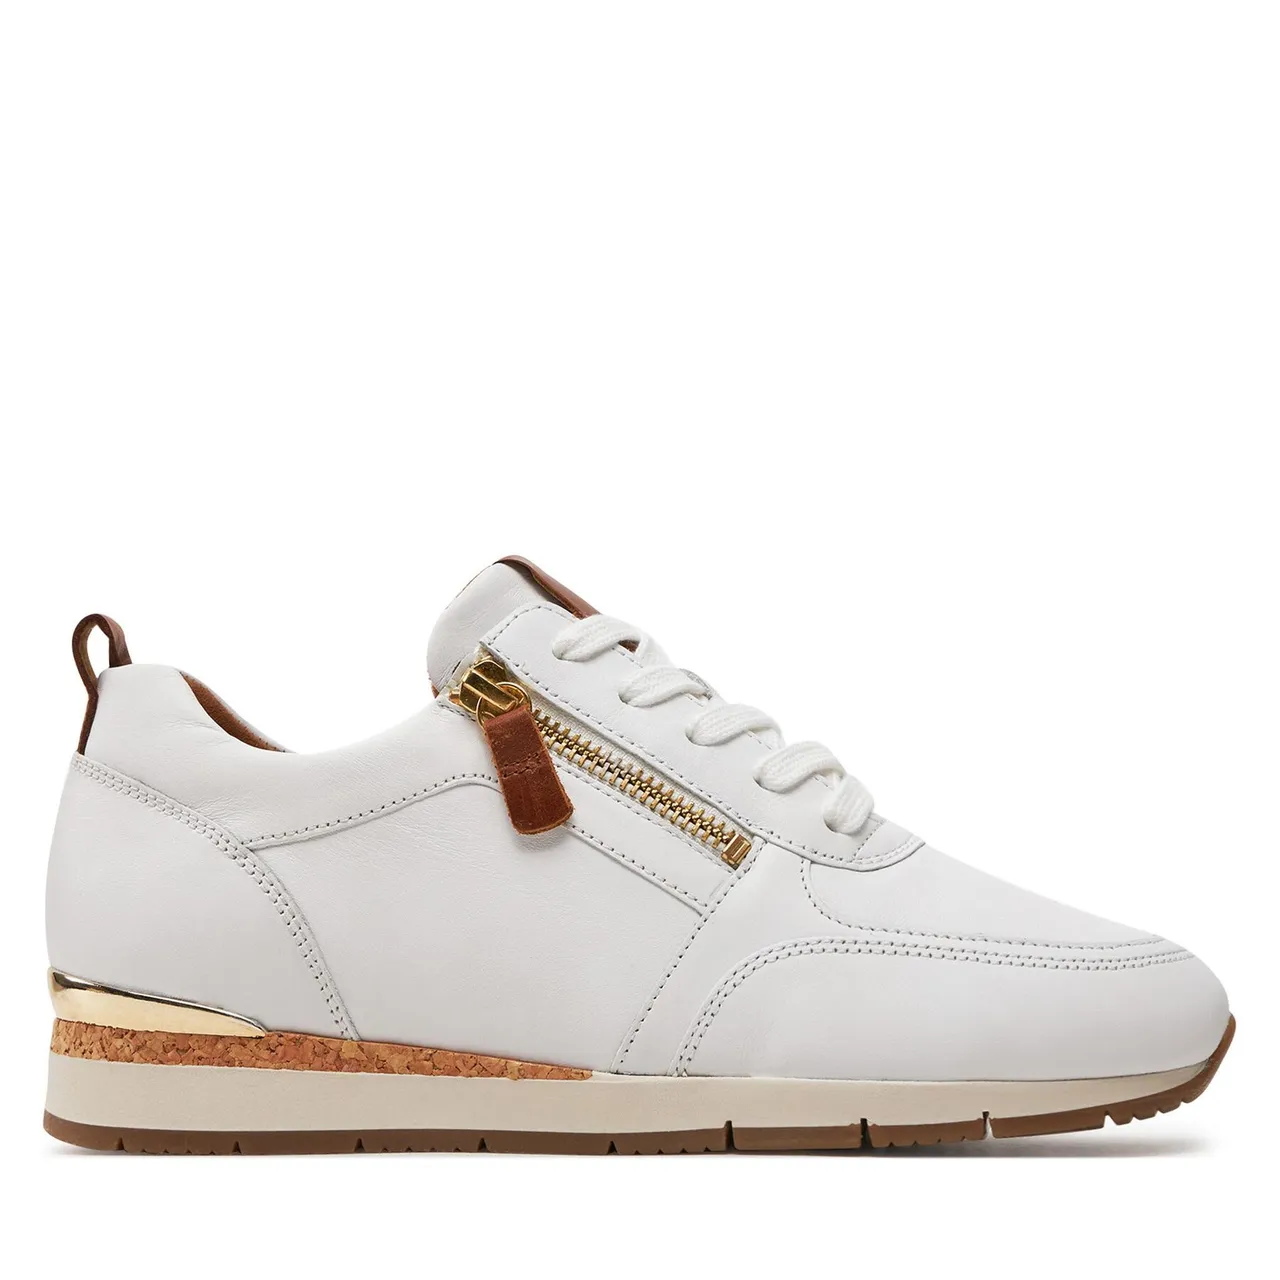 Sneakers Gabor 43.411.21 Weiss/Camel (Gold)